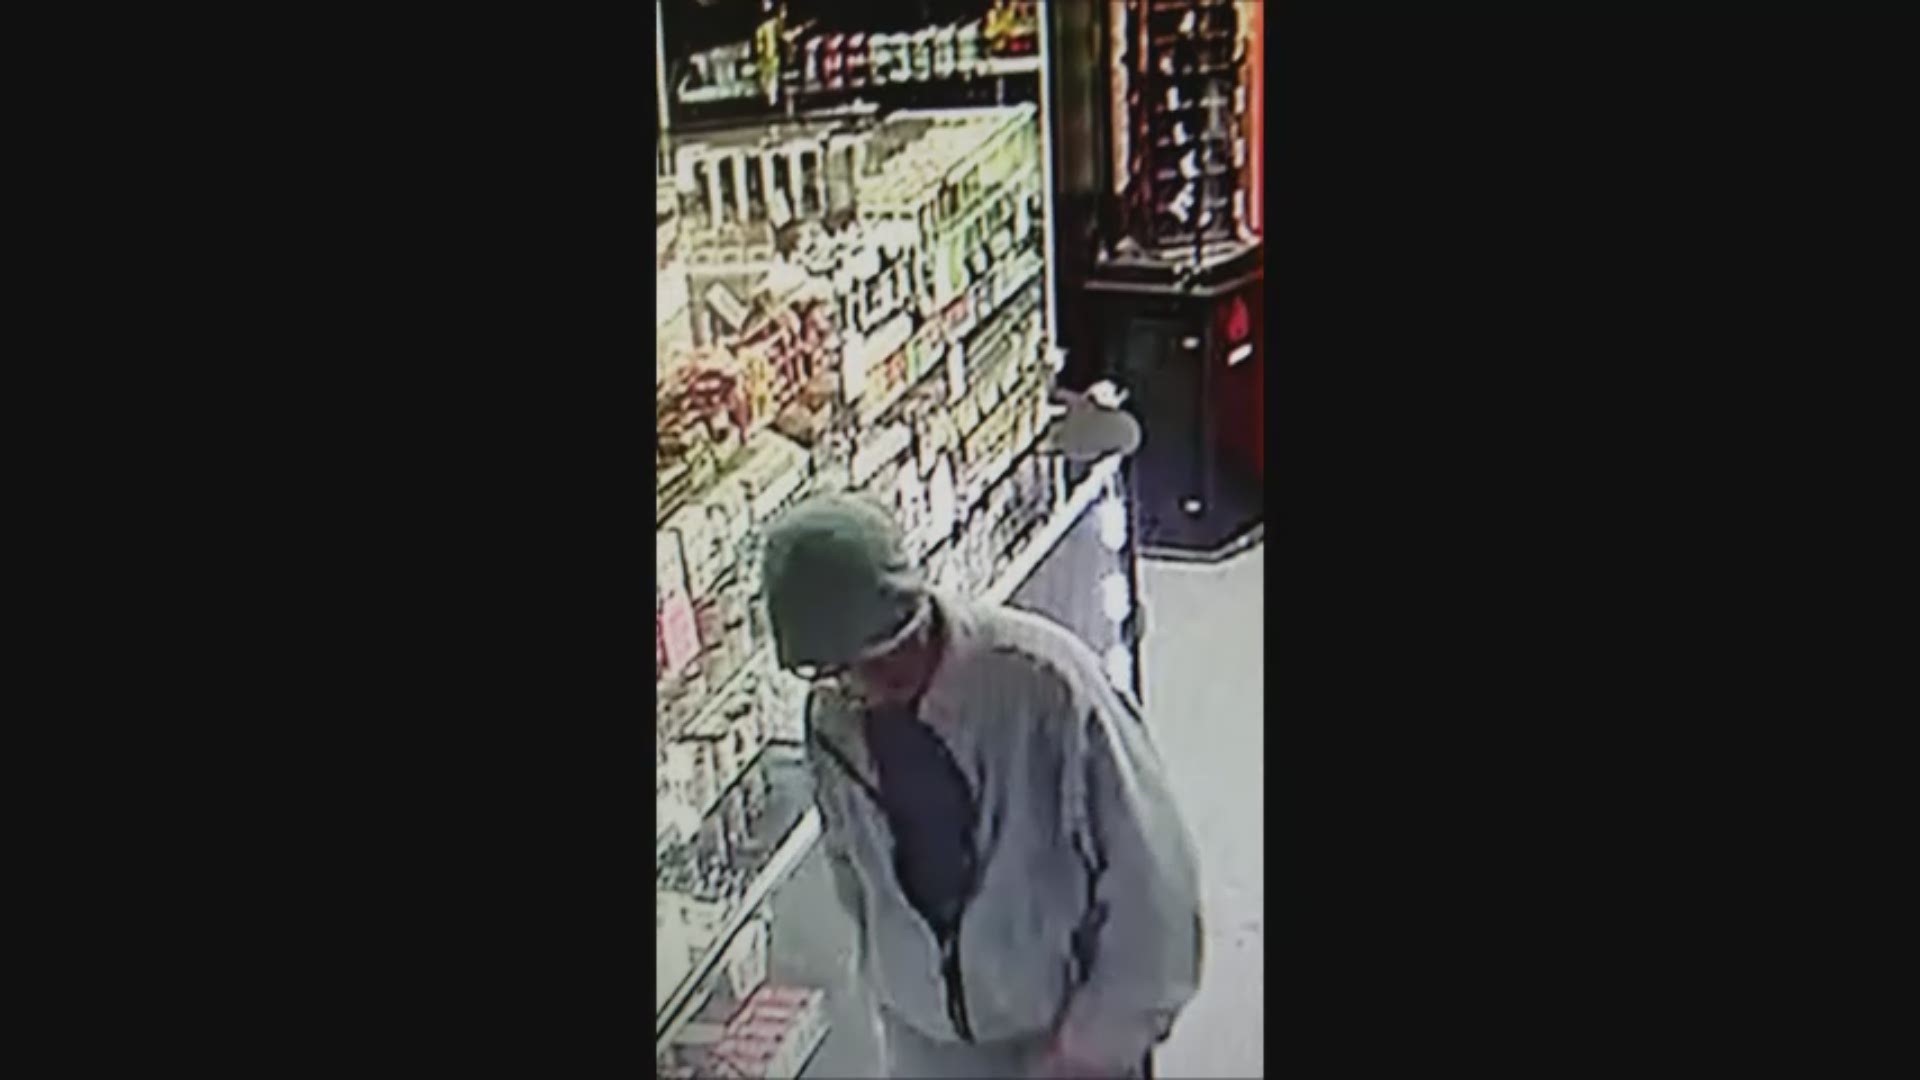 Police are asking for the public's help in identifying the man seen in this video in connection to an armed robbery.